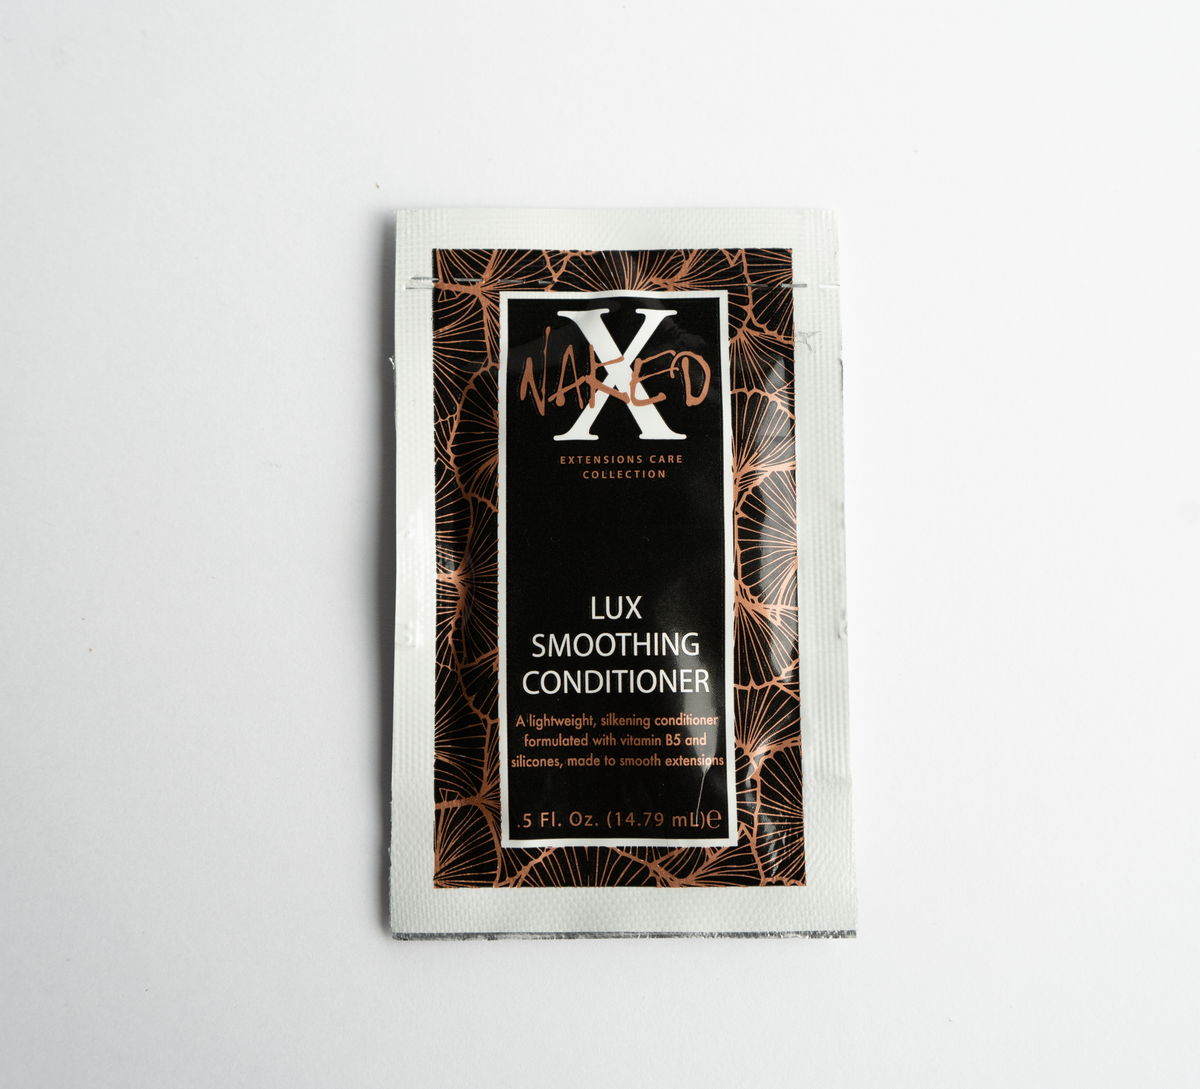 Naked X Lux Smoothing Conditioner